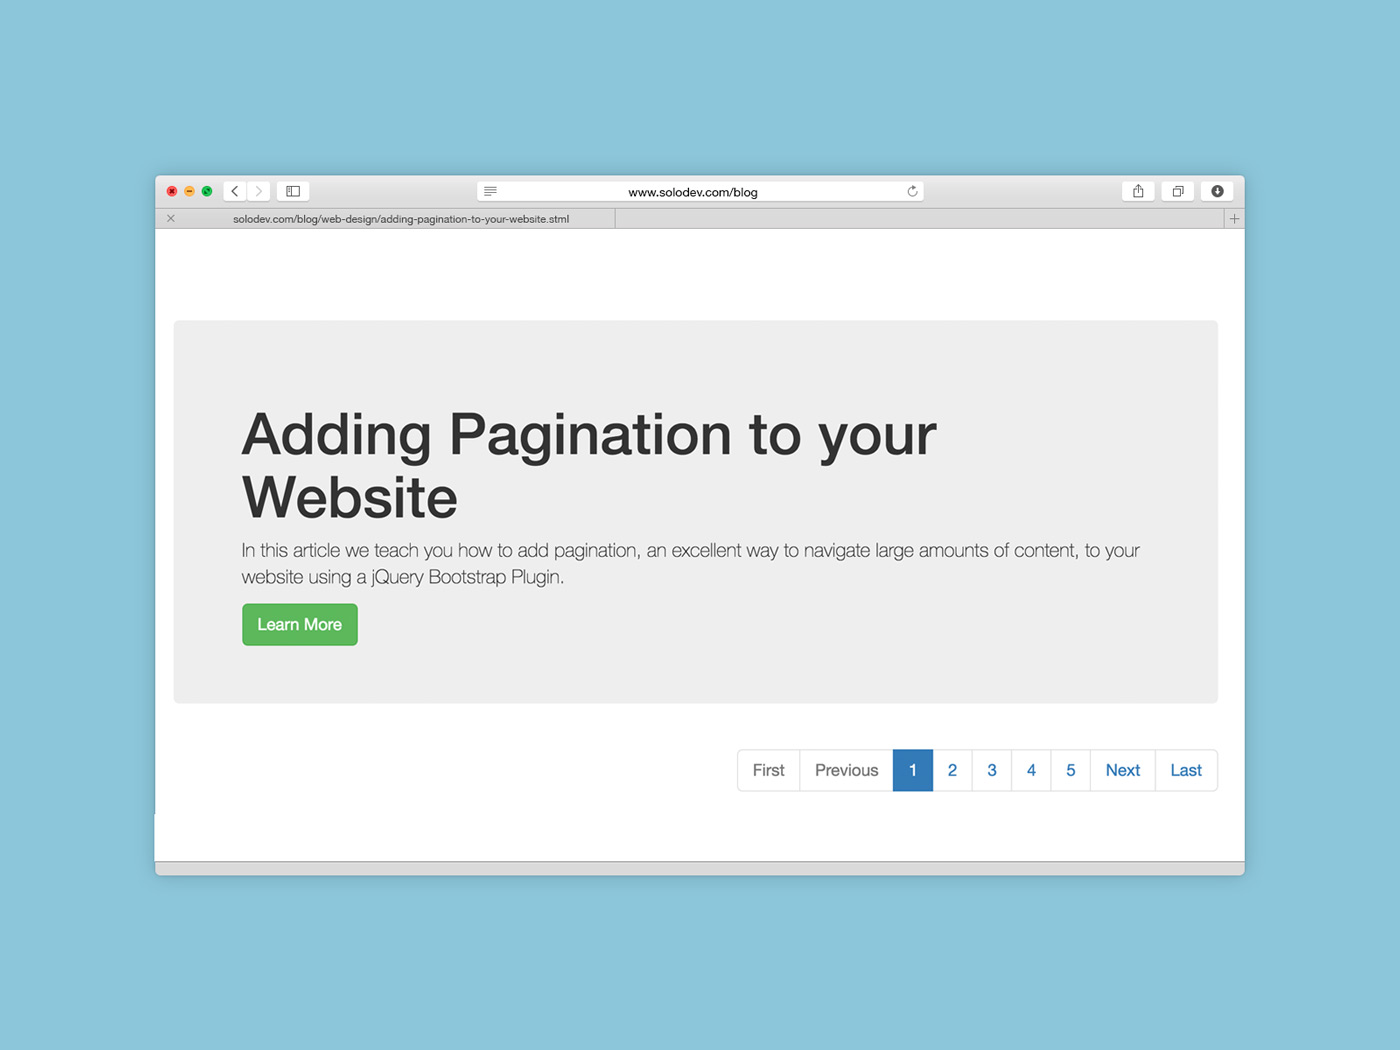 Add Pagination to Your Website